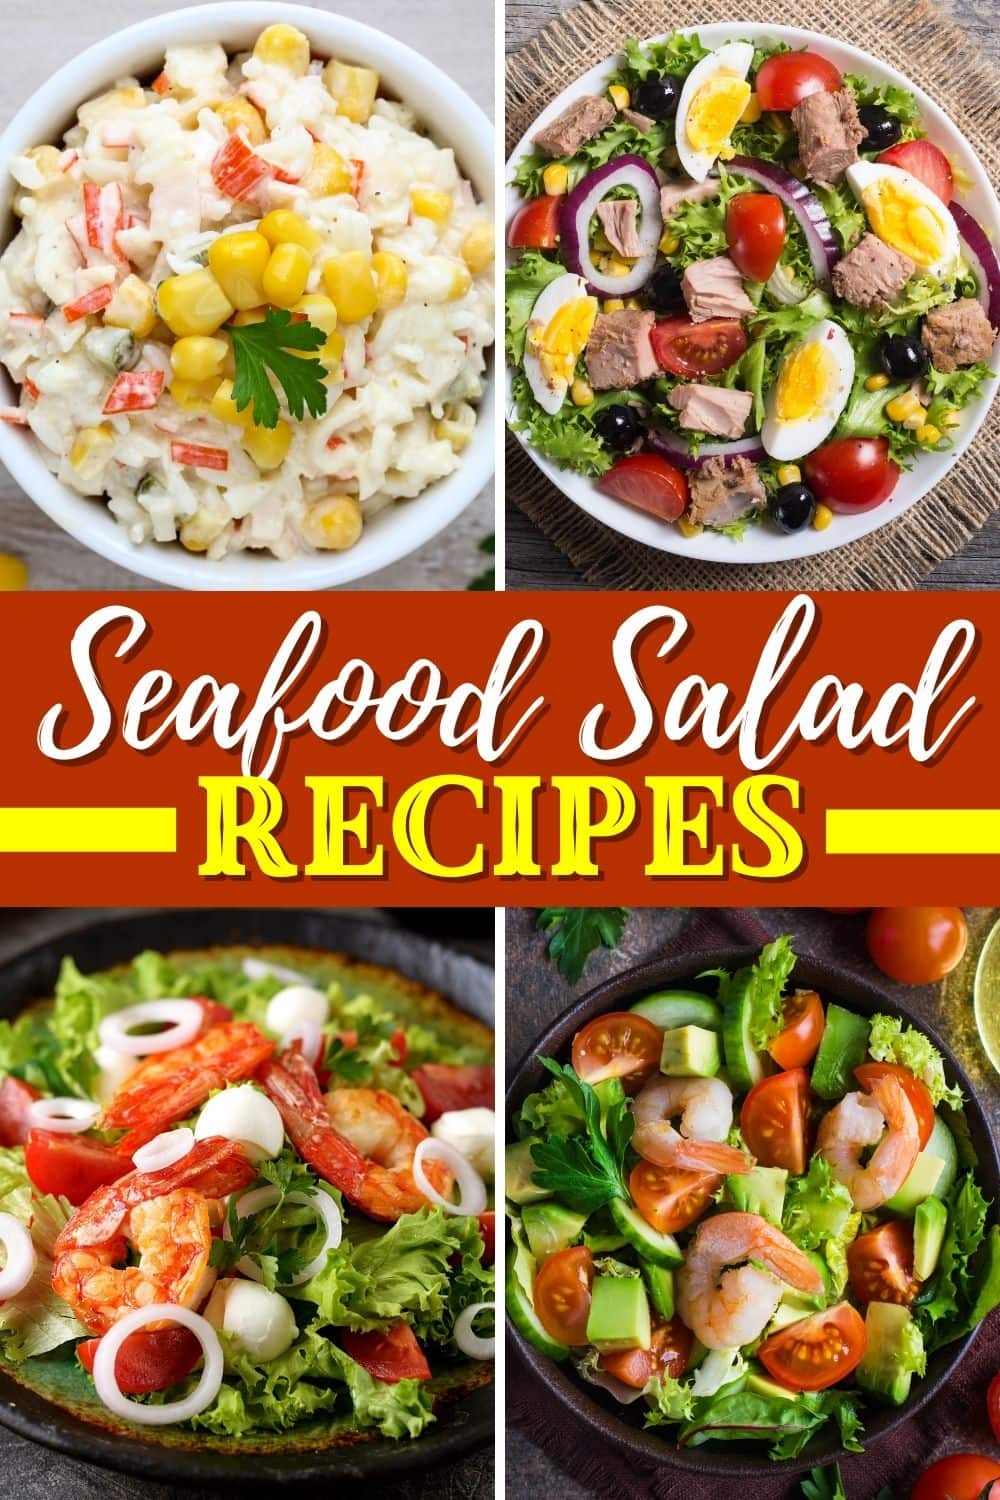 20 Seafood Salad Recipes to Make at Home - Insanely Good